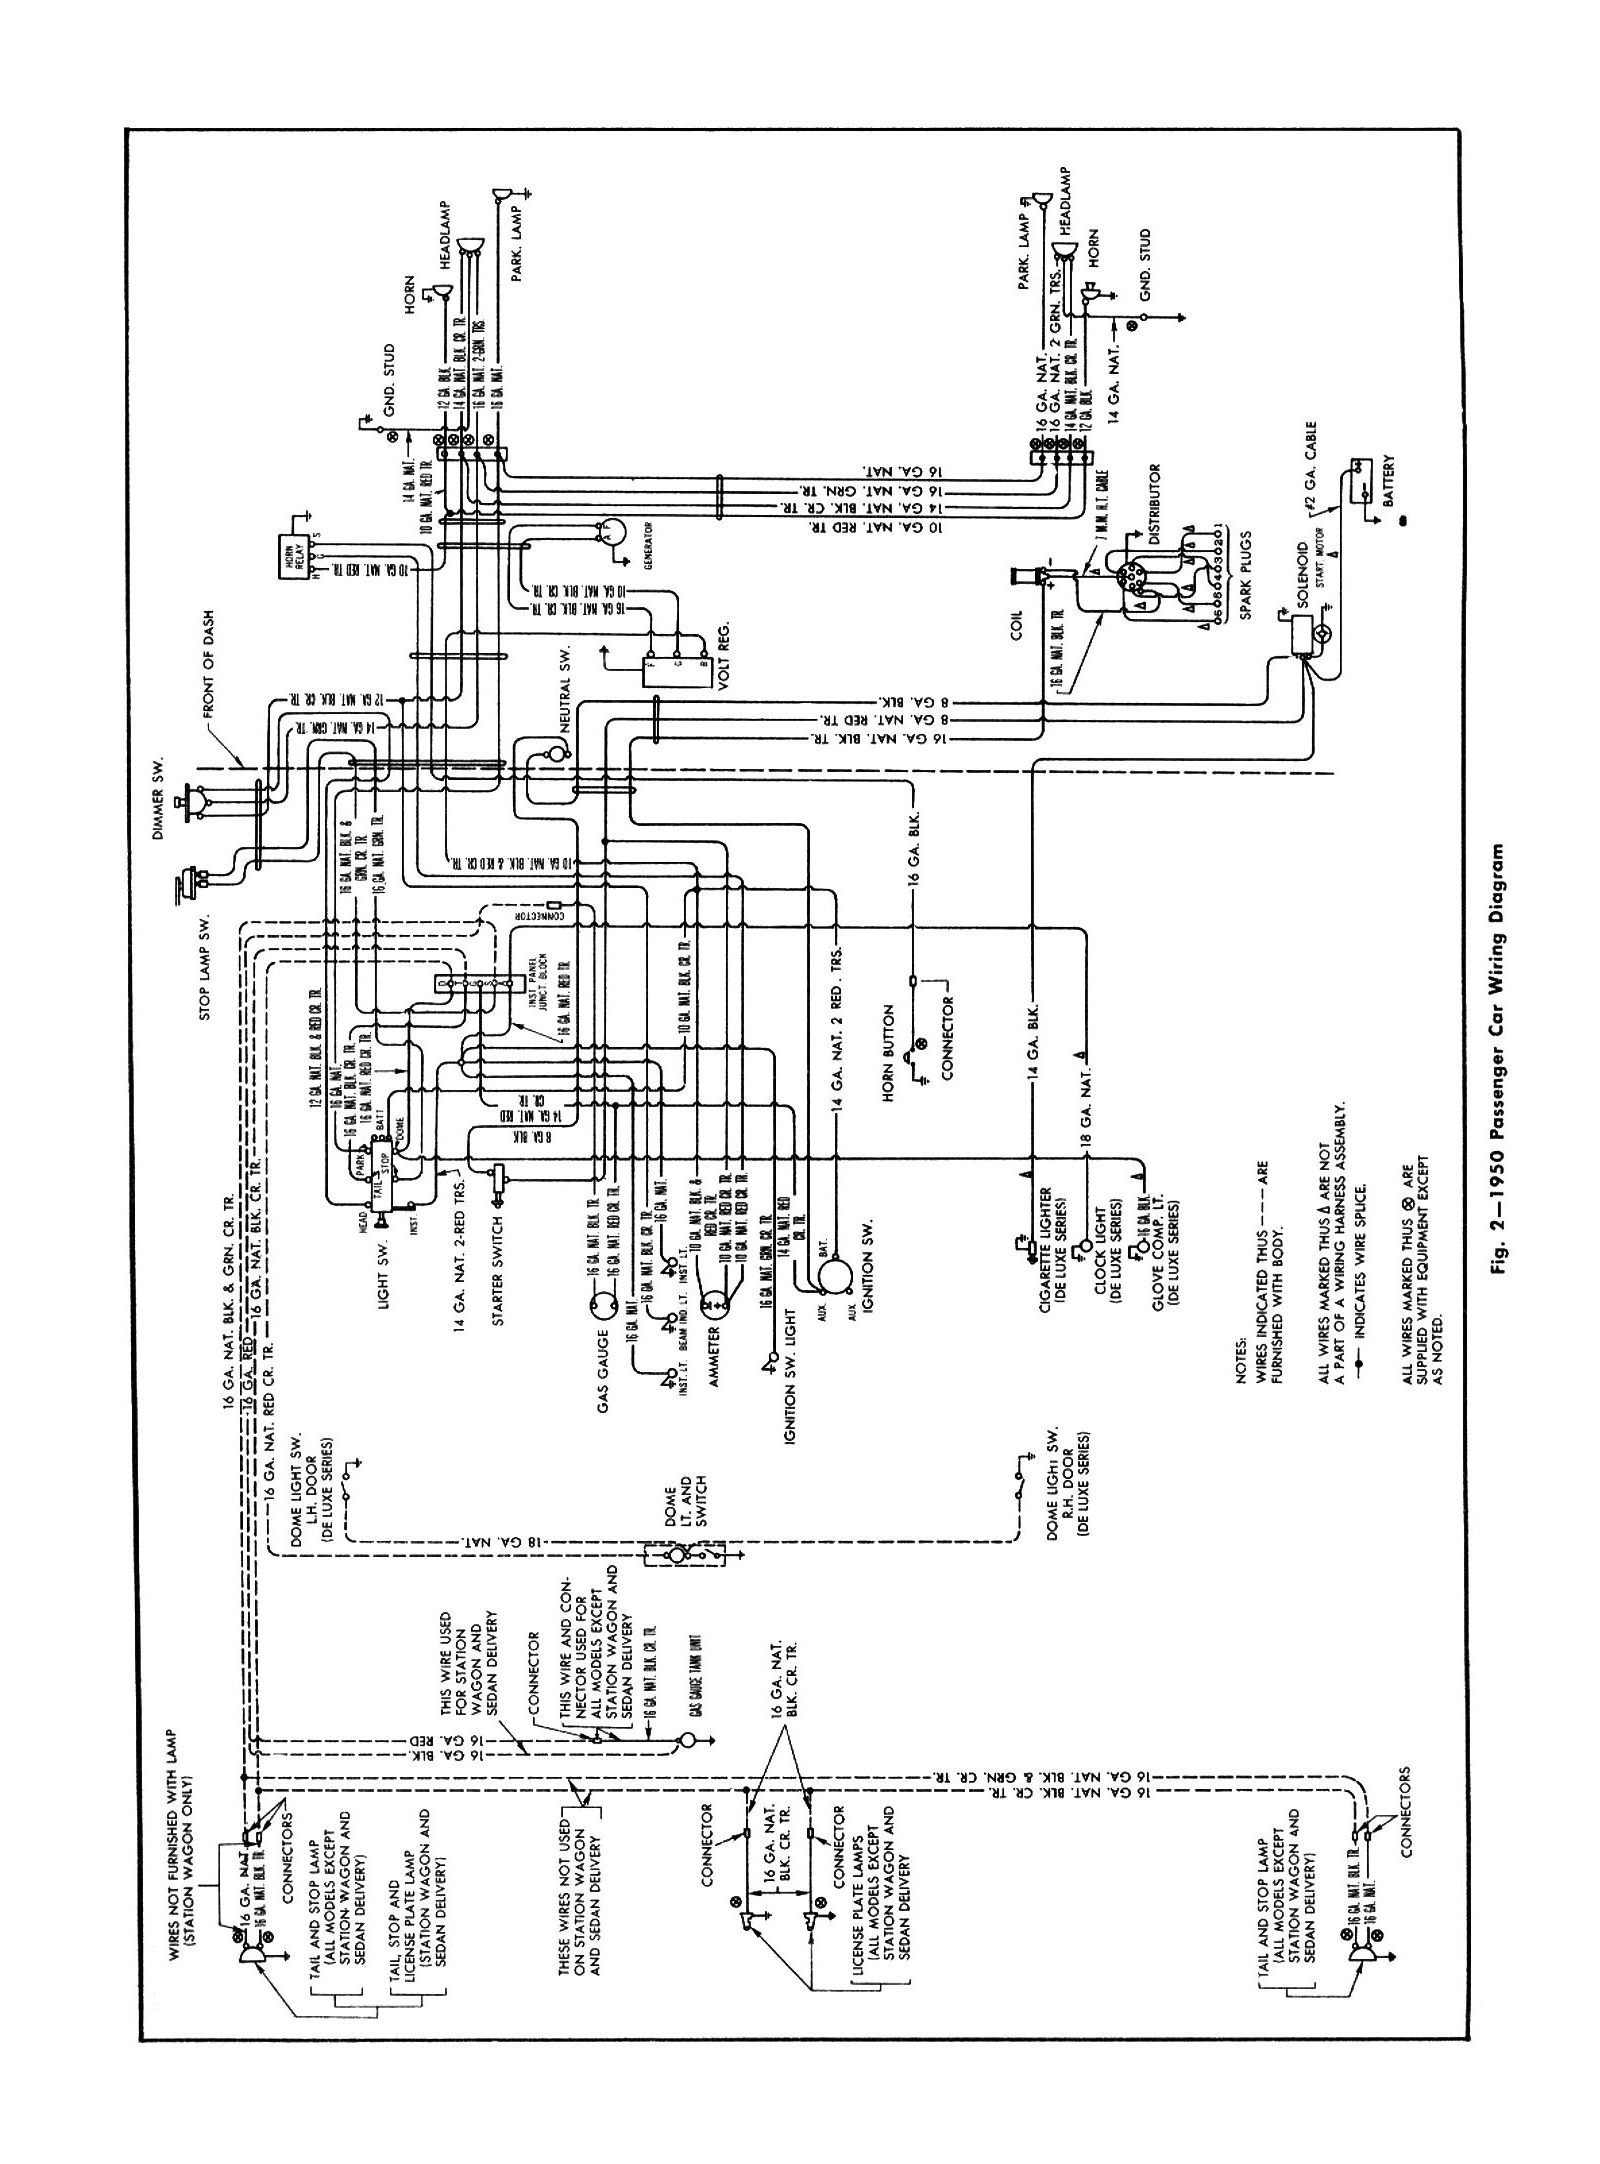 216 Chevy Engine Diagram Chevy Wiring Diagrams Of 216 Chevy Engine Diagram